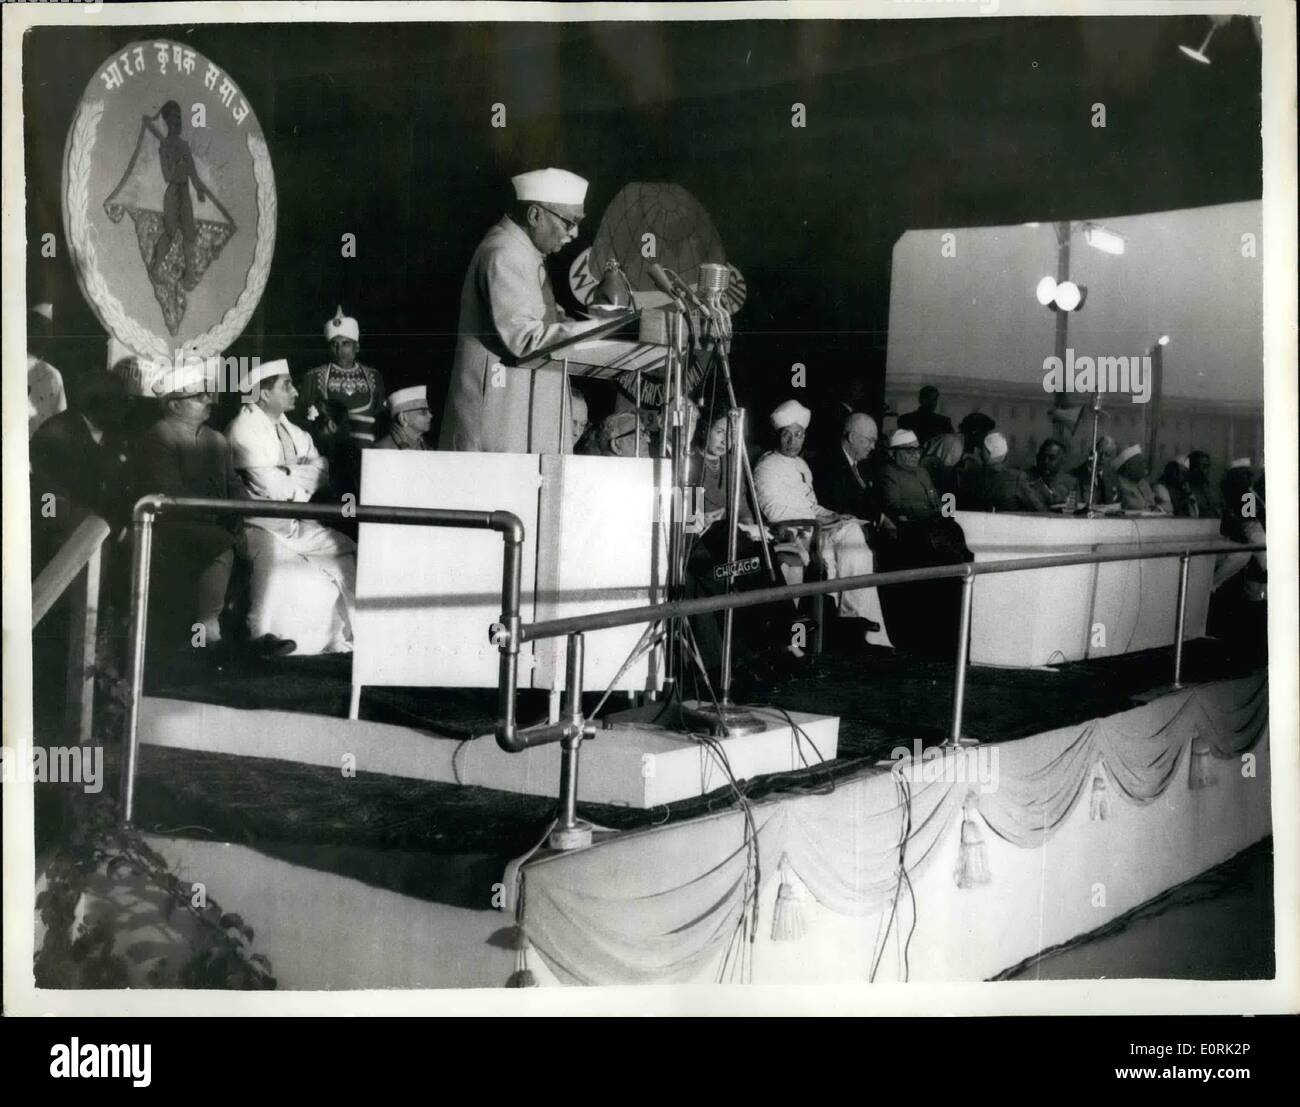 Dec. 12, 1959 - PRES. EISENHOWER ATTENDS INAUGURATION OF WORLD AGRICULTURAL FAIR'' - IN NEW DELHI. During his Goodwill Tour - PRESIDENT EISENHOWER attended the inauguration ceremony of the World Agricultural Fair in New Delhi - by the Pres. of India. KEYSTONE PHOTO SHOWS:- DR. RAJENDRA PRASAD the Pres. of India makes his speech - at the ceremony Pres. Eisenhower and other are on right Stock Photo